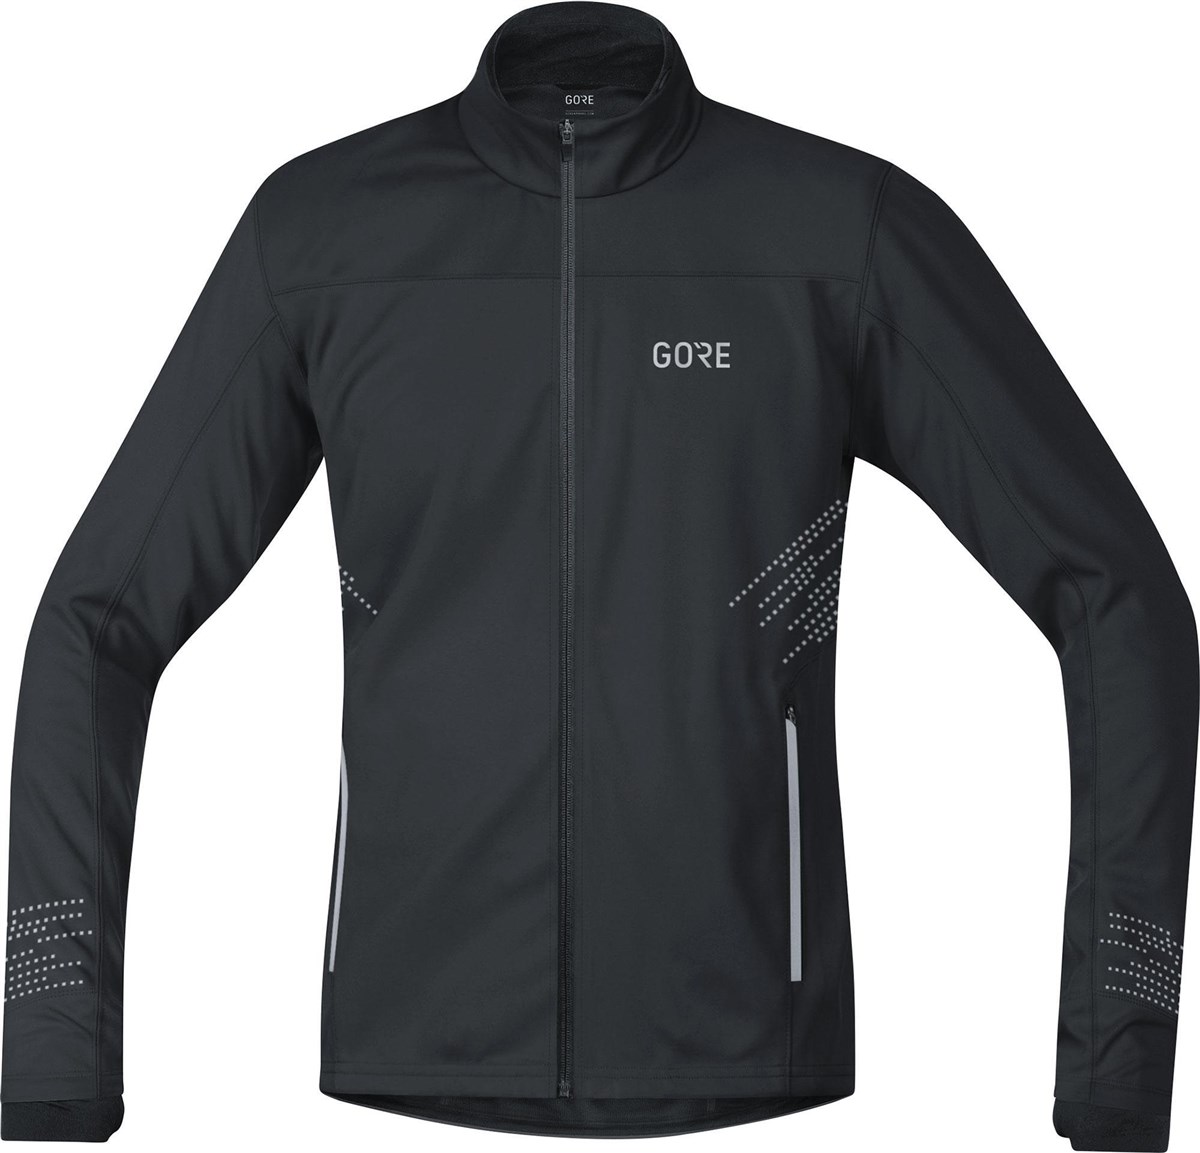 Gore R5 Windstopper Jacket product image